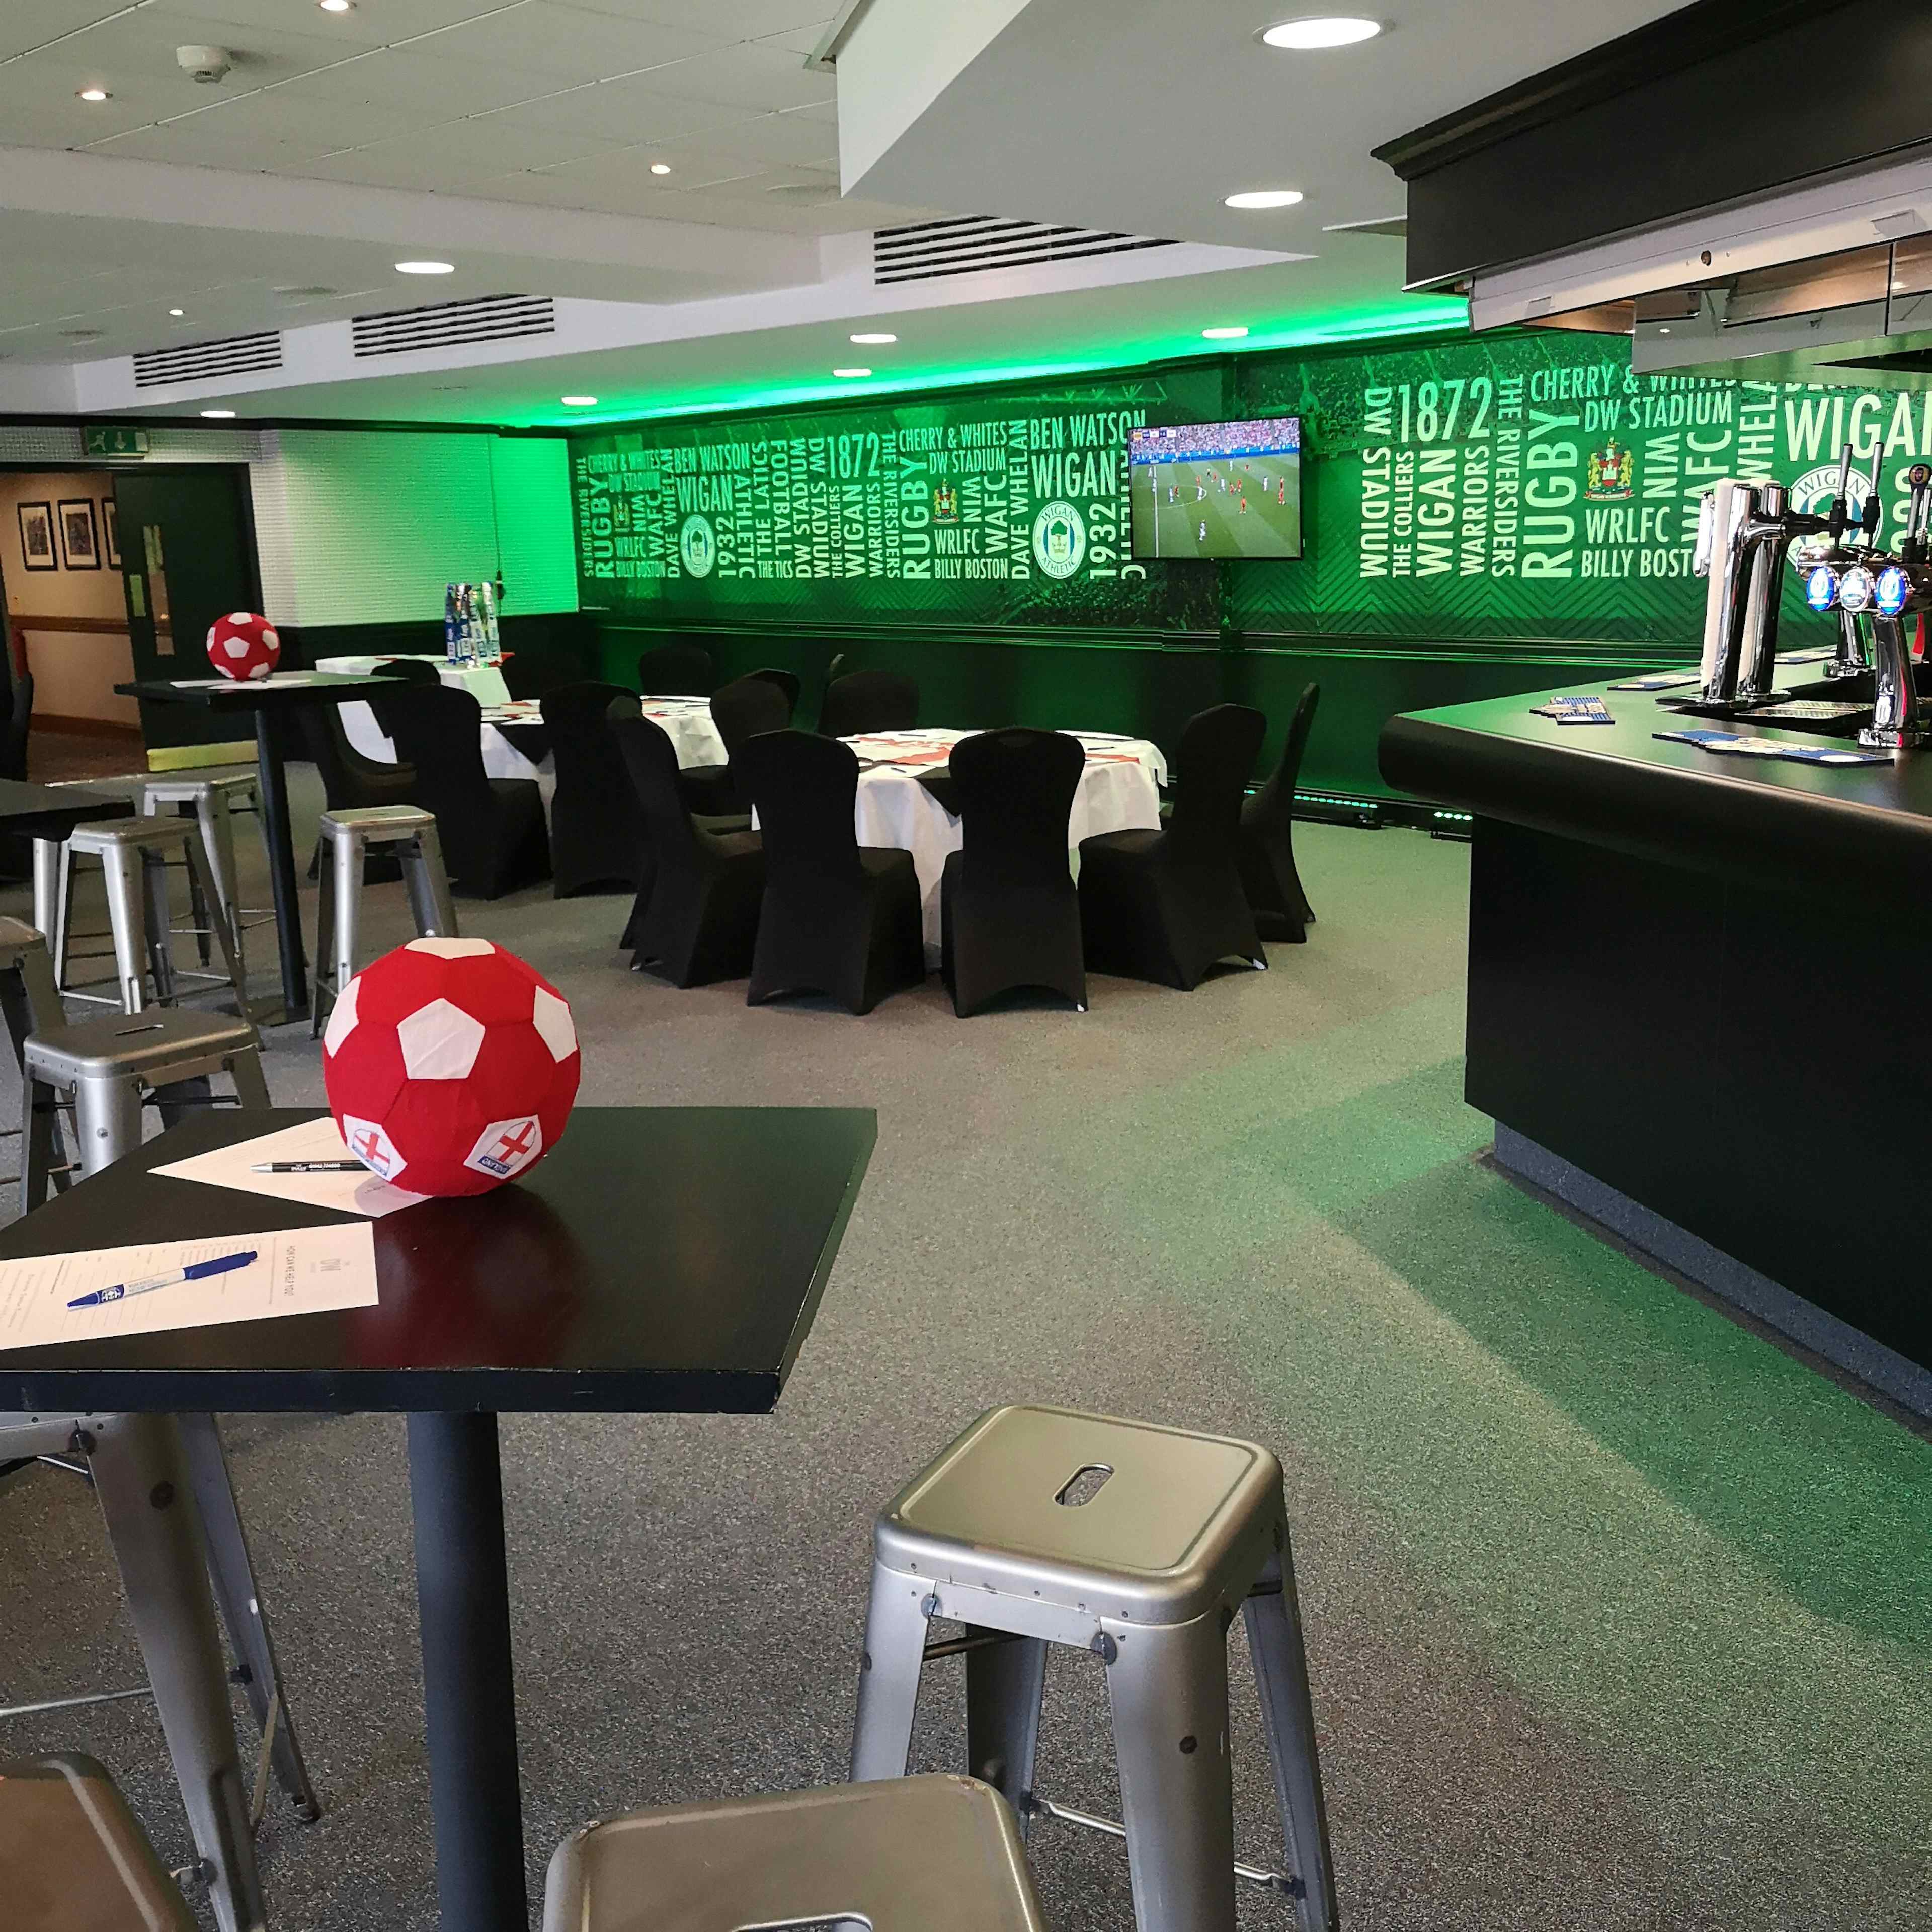 The DW Stadium - The Carling Lounge image 1